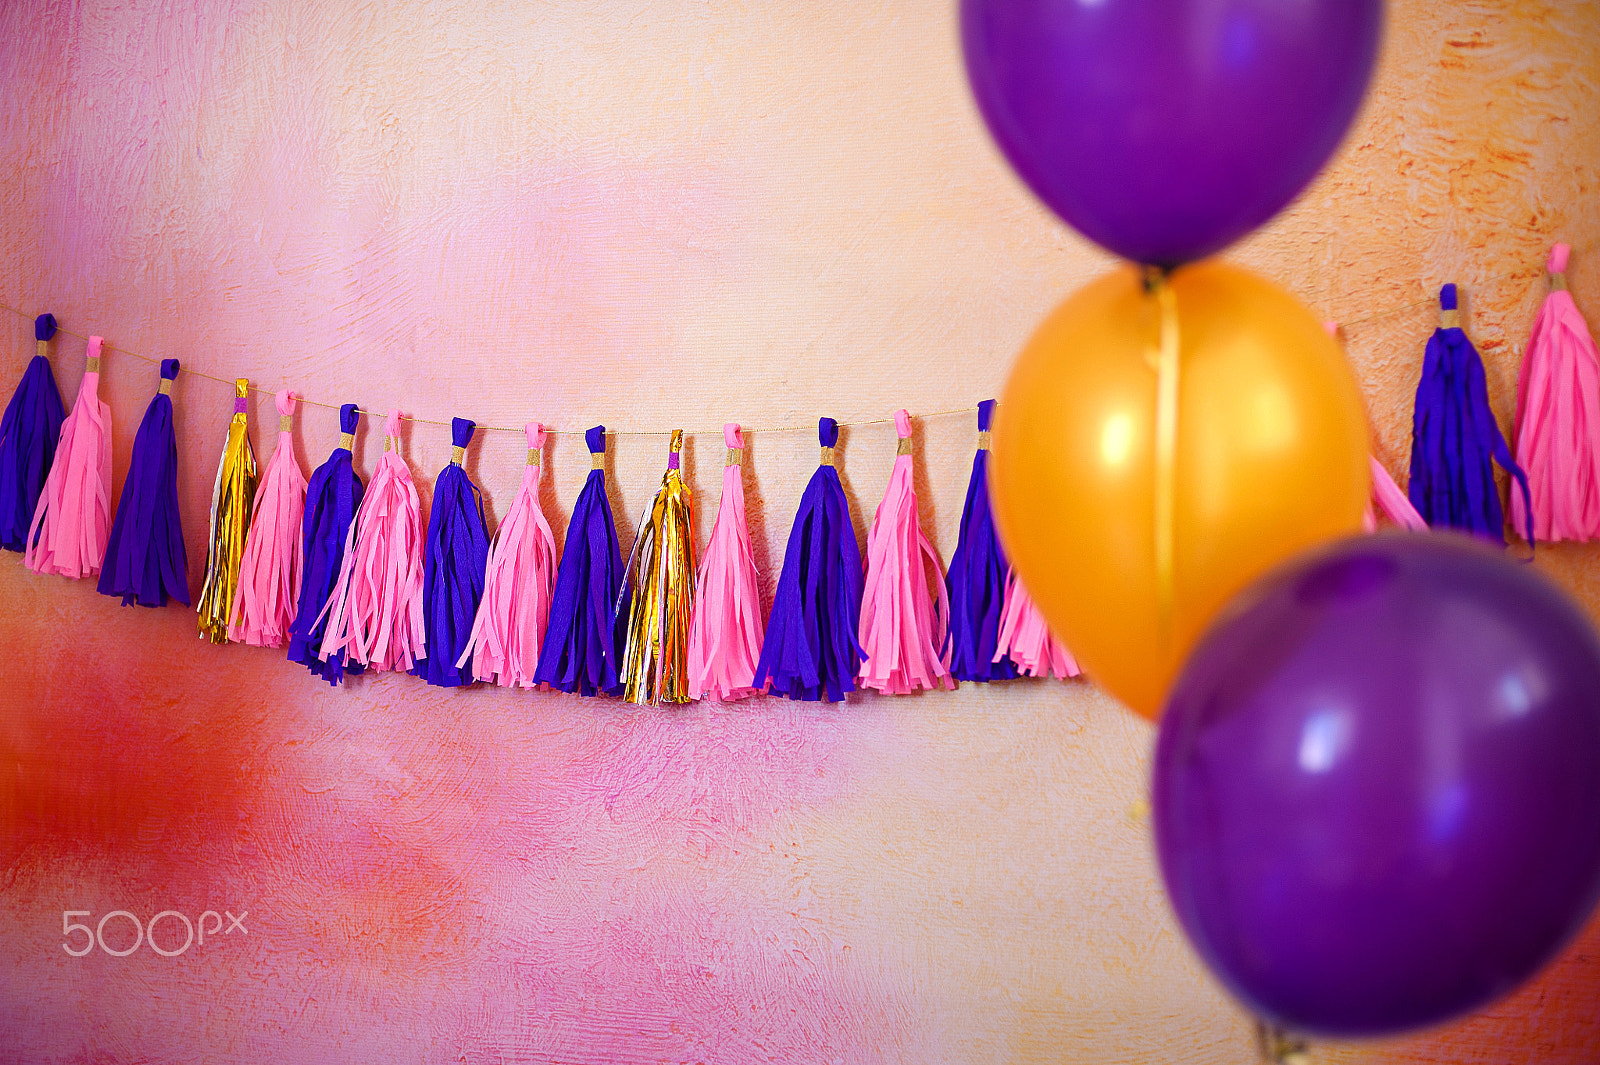 Nikon D700 sample photo. Garland on a painted background with multi-colored balloons photography